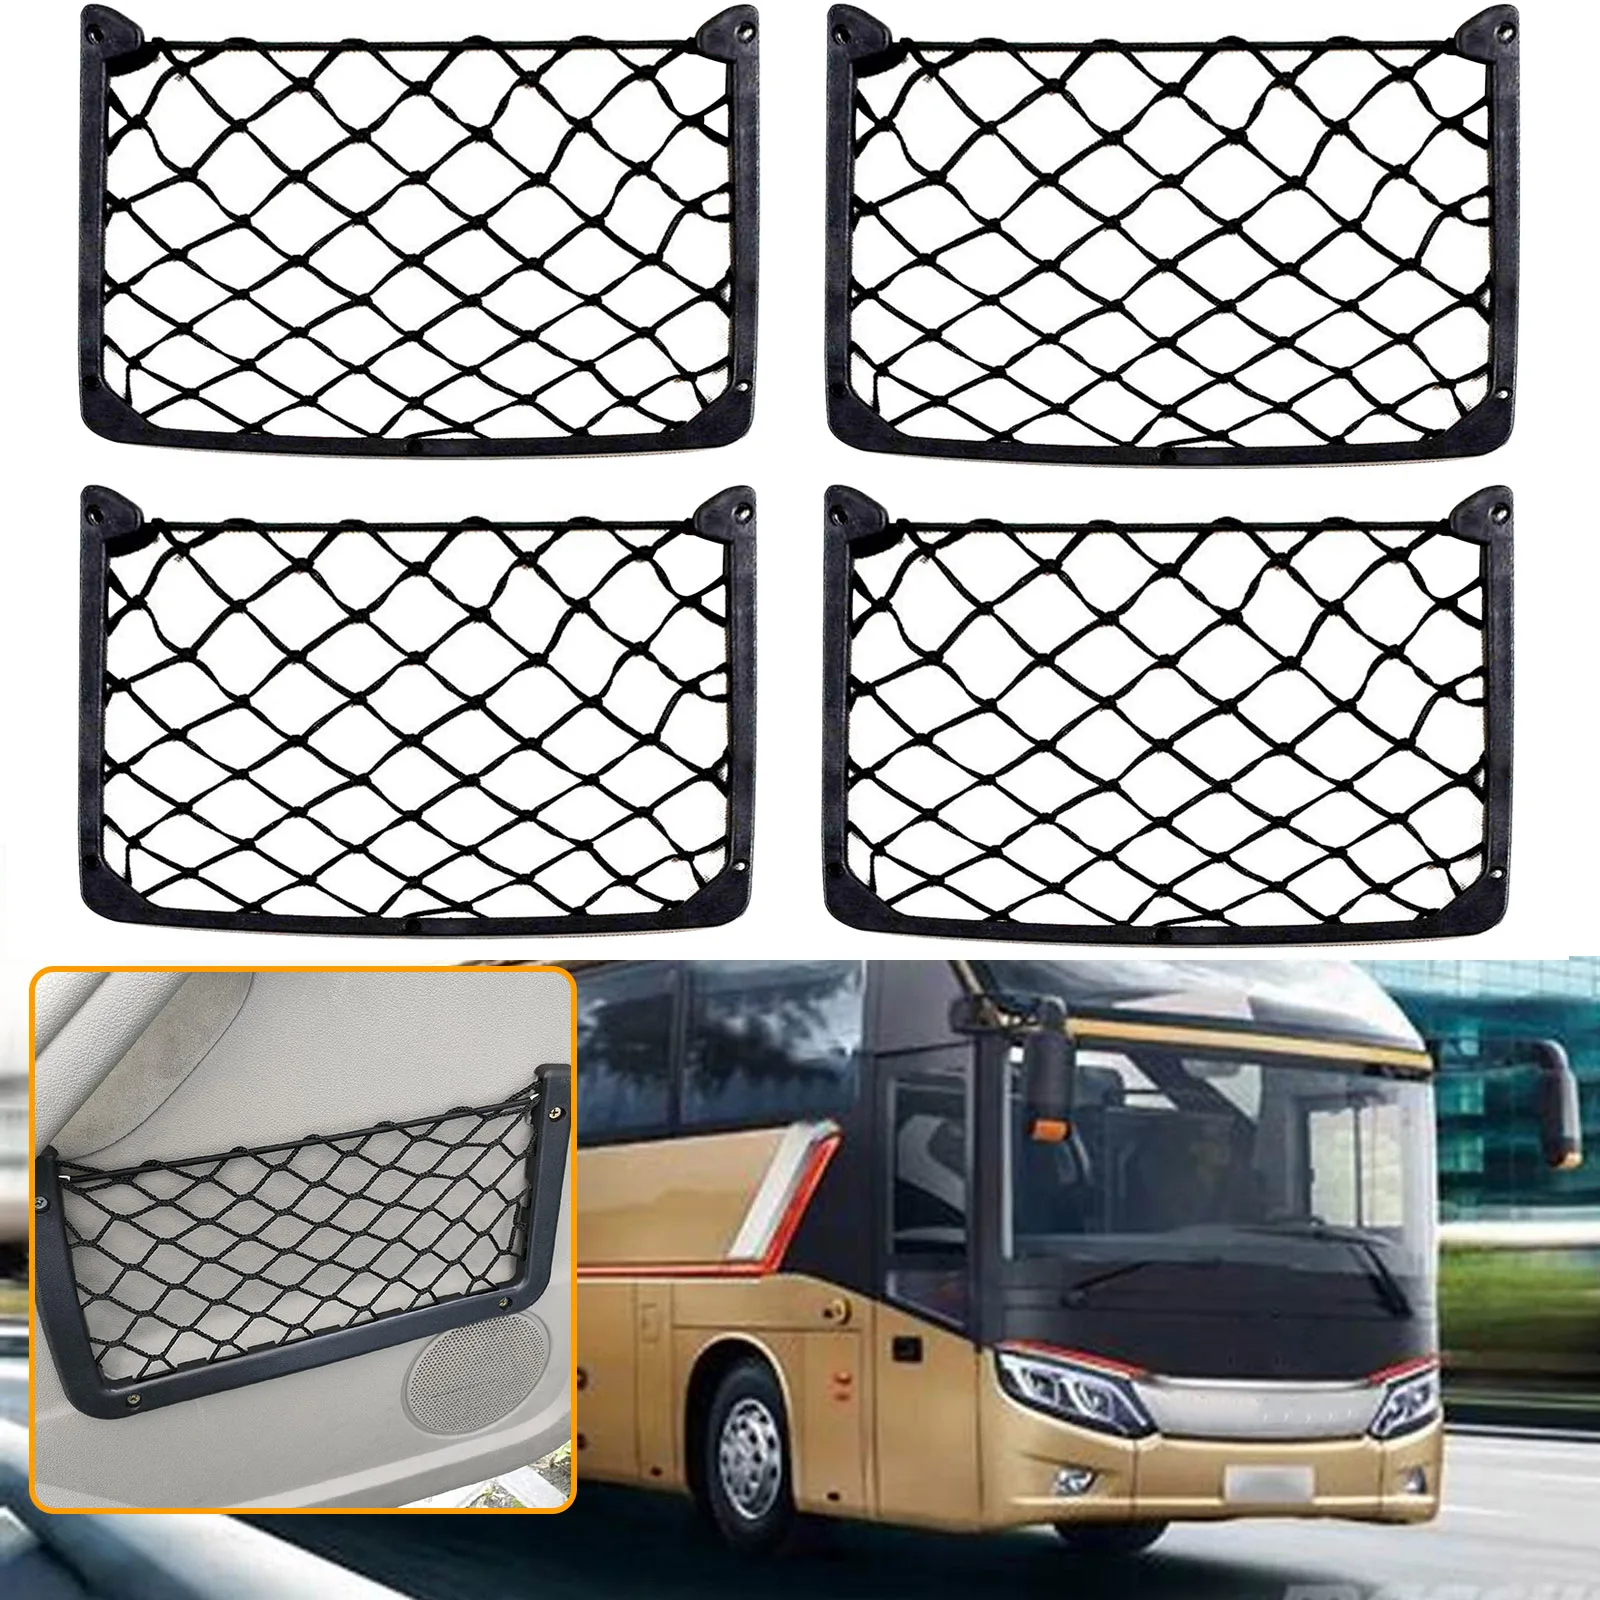 

Car Storage Net 8"X12" Large Size ABS Plastic Netting Bag Organizer for Car Frame Stretch Mesh Net Universal Cargo with Screws